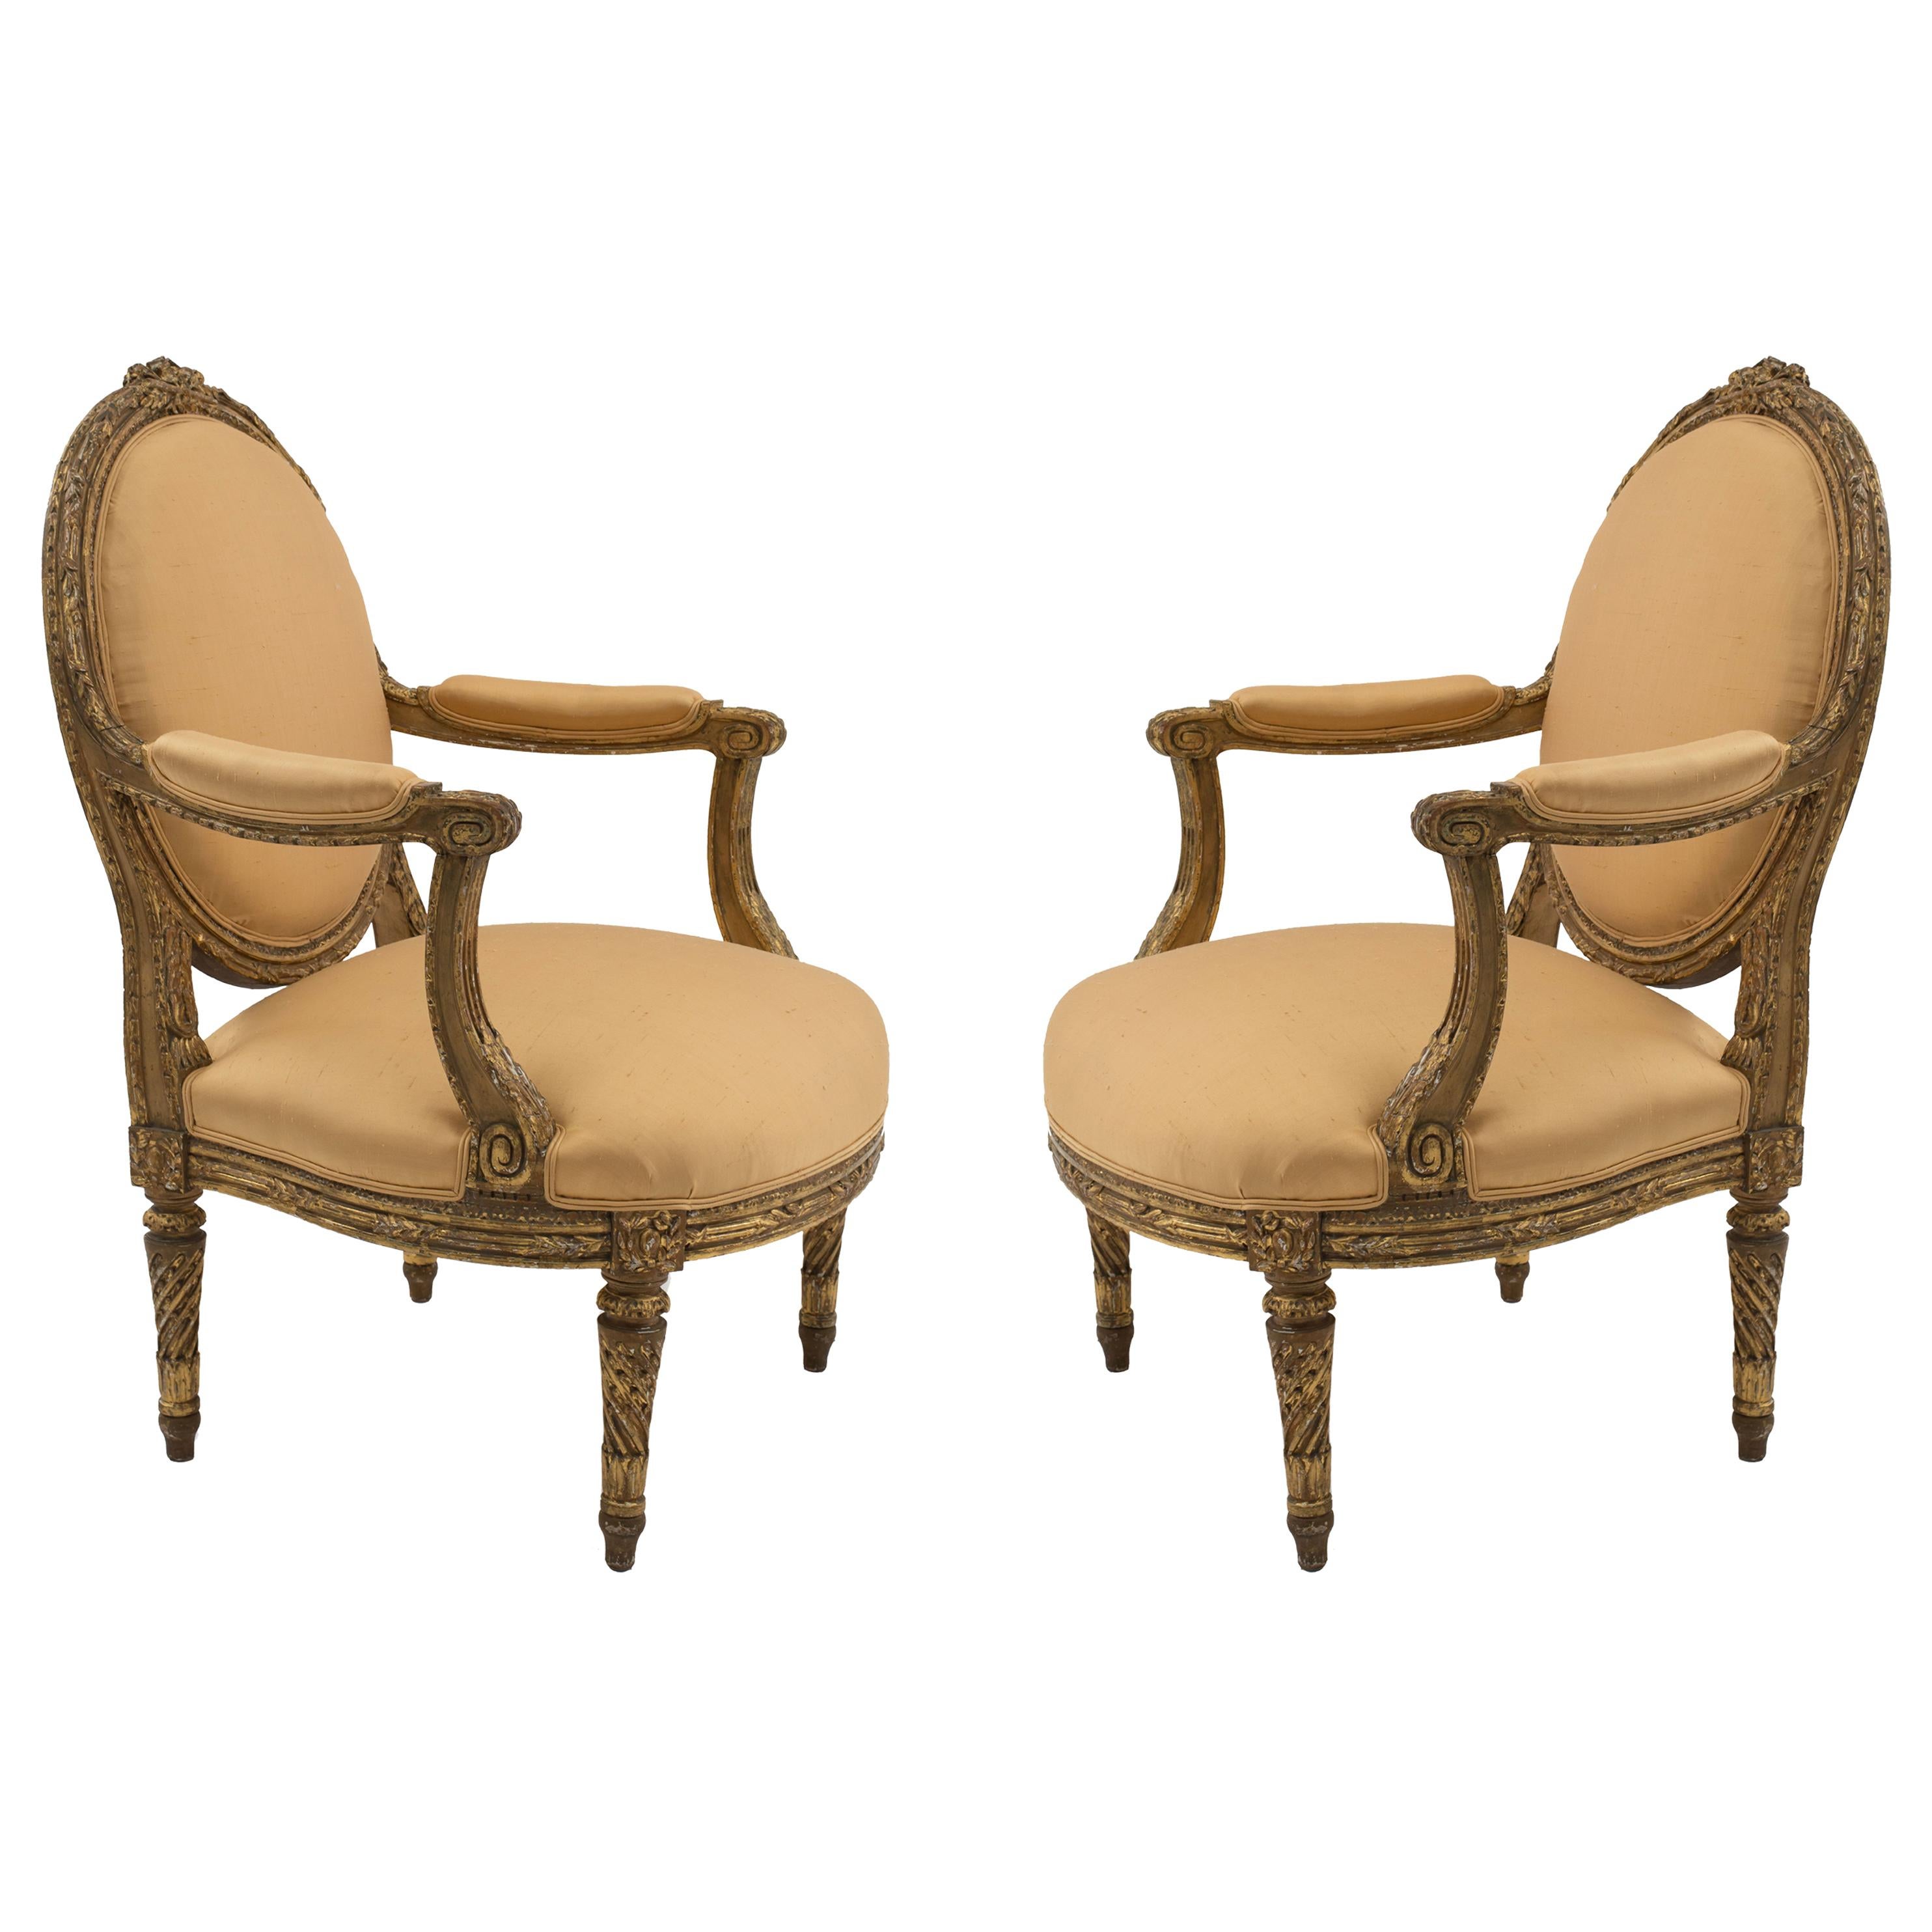 Pair of Louis XVI-Style Oval Back Armchairs